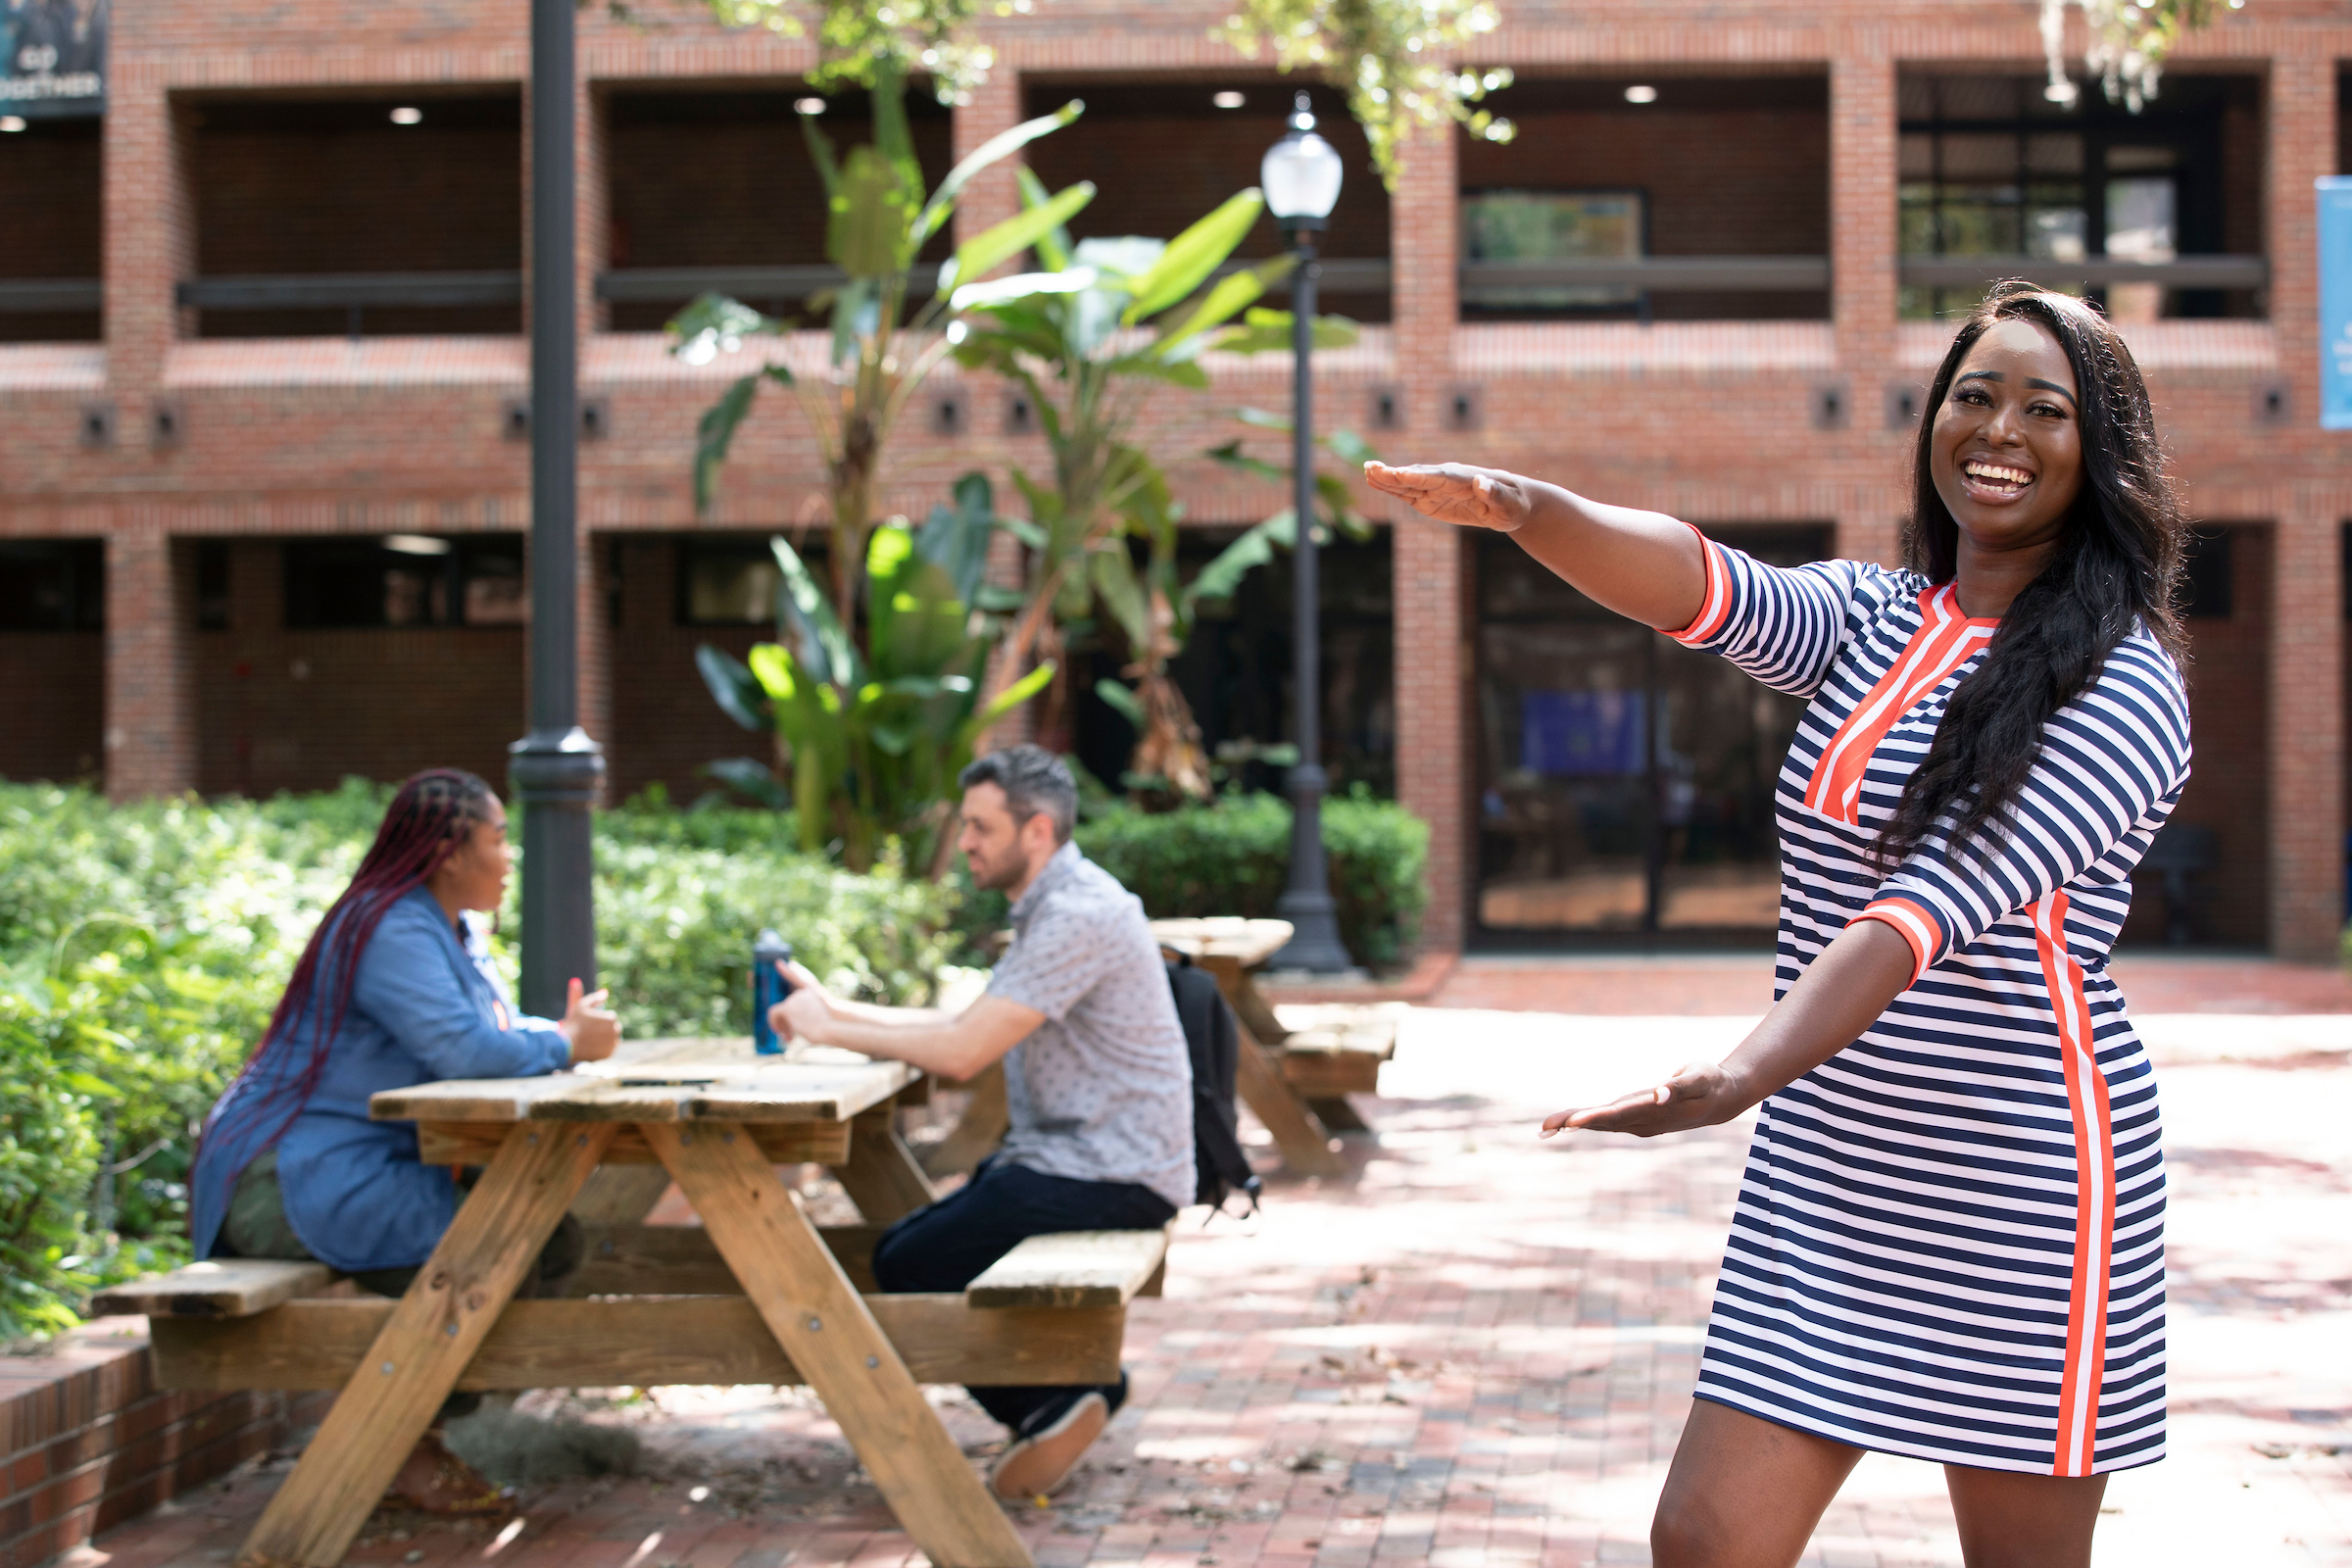 A photo of a student doing the Gator chomp, with two students seated a picnic table in the background.